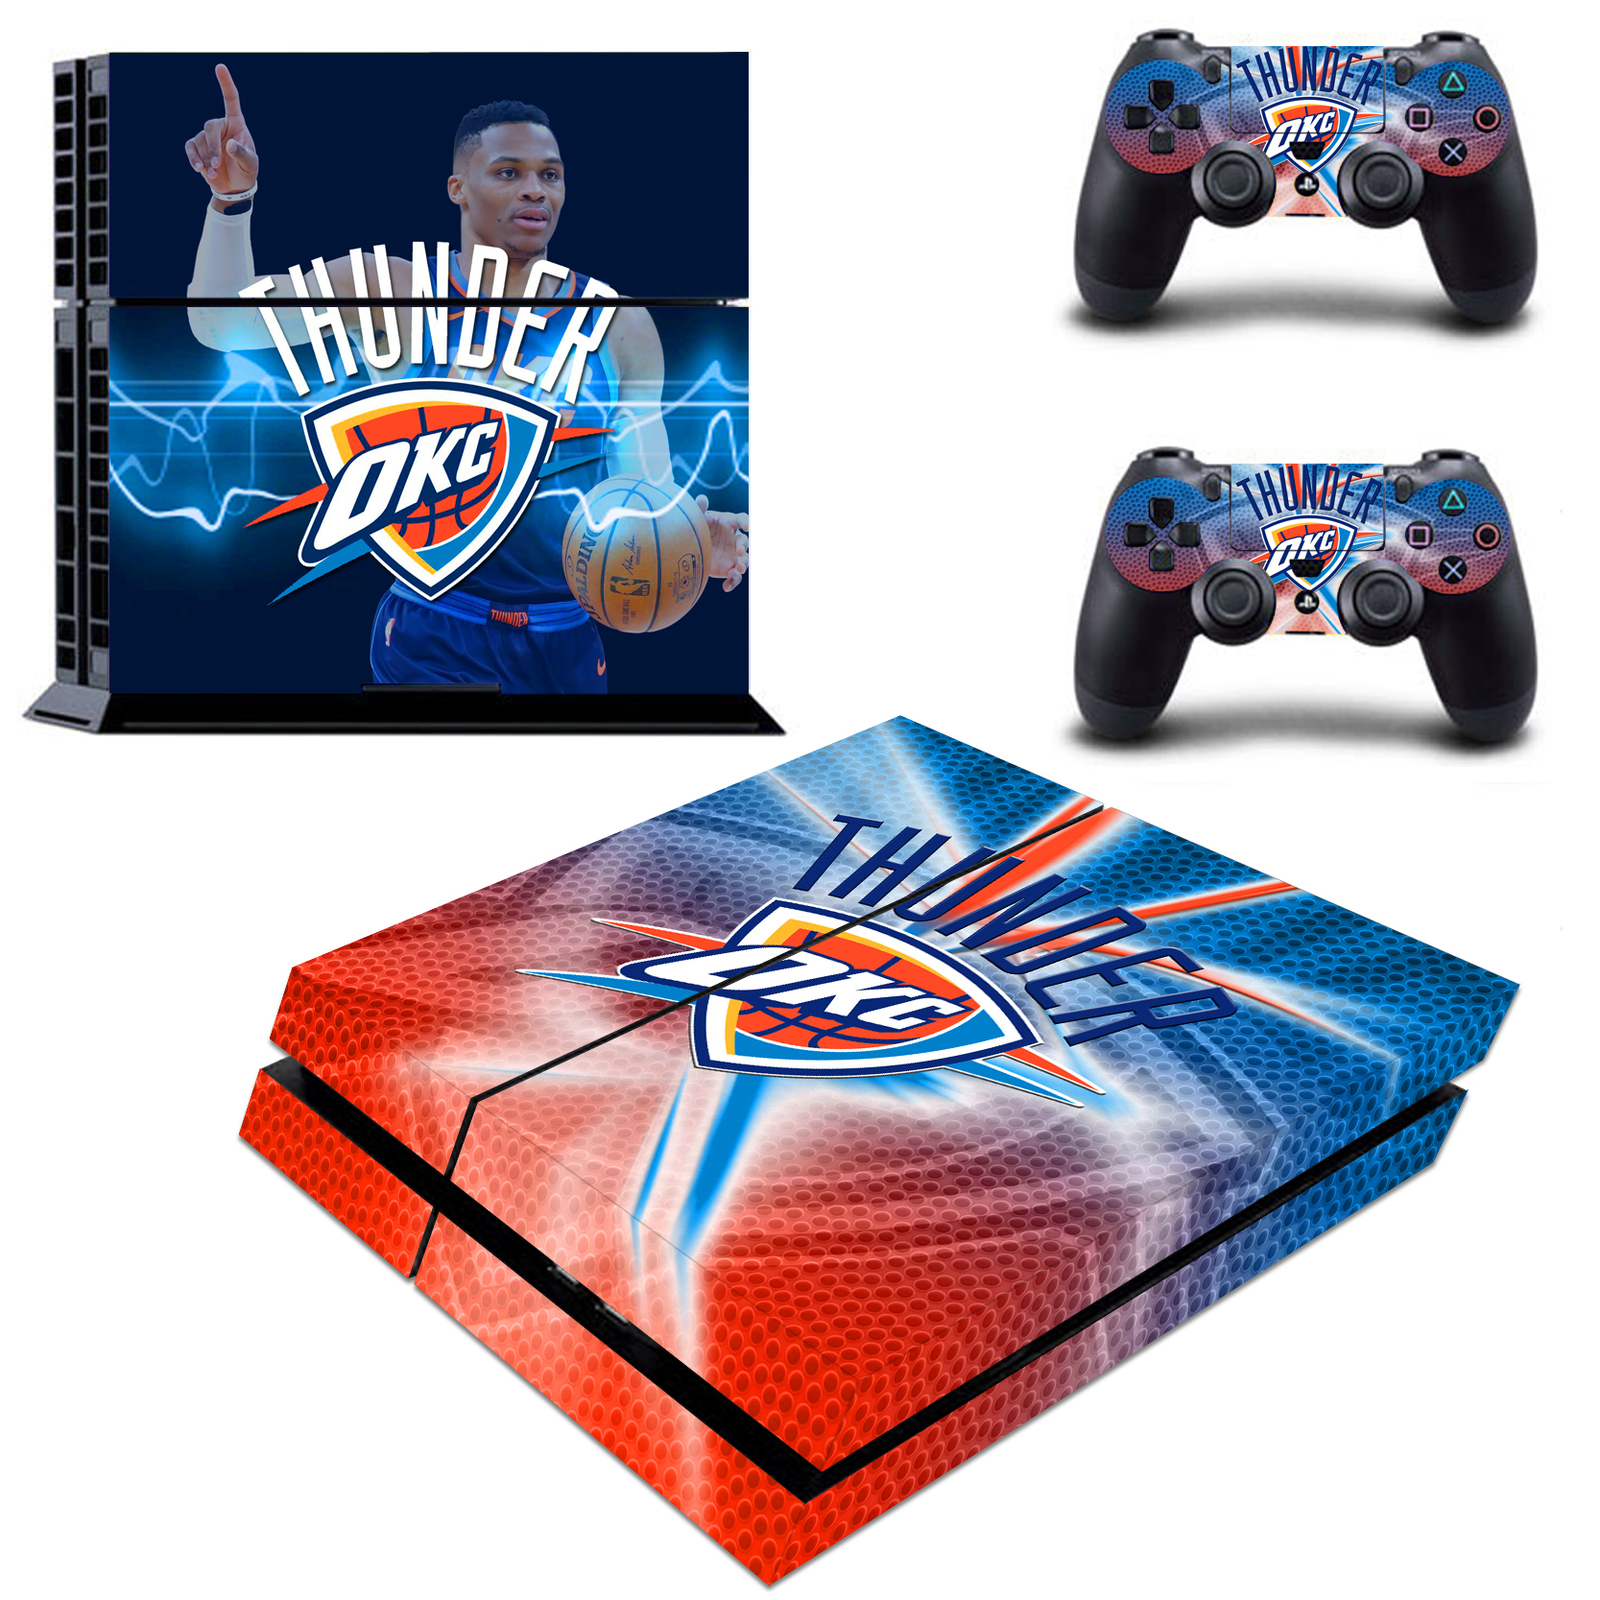 PS4 Console Controller Skin OKC Thunder Russell NBA VInyl Decals Covers Stickers - $13.00